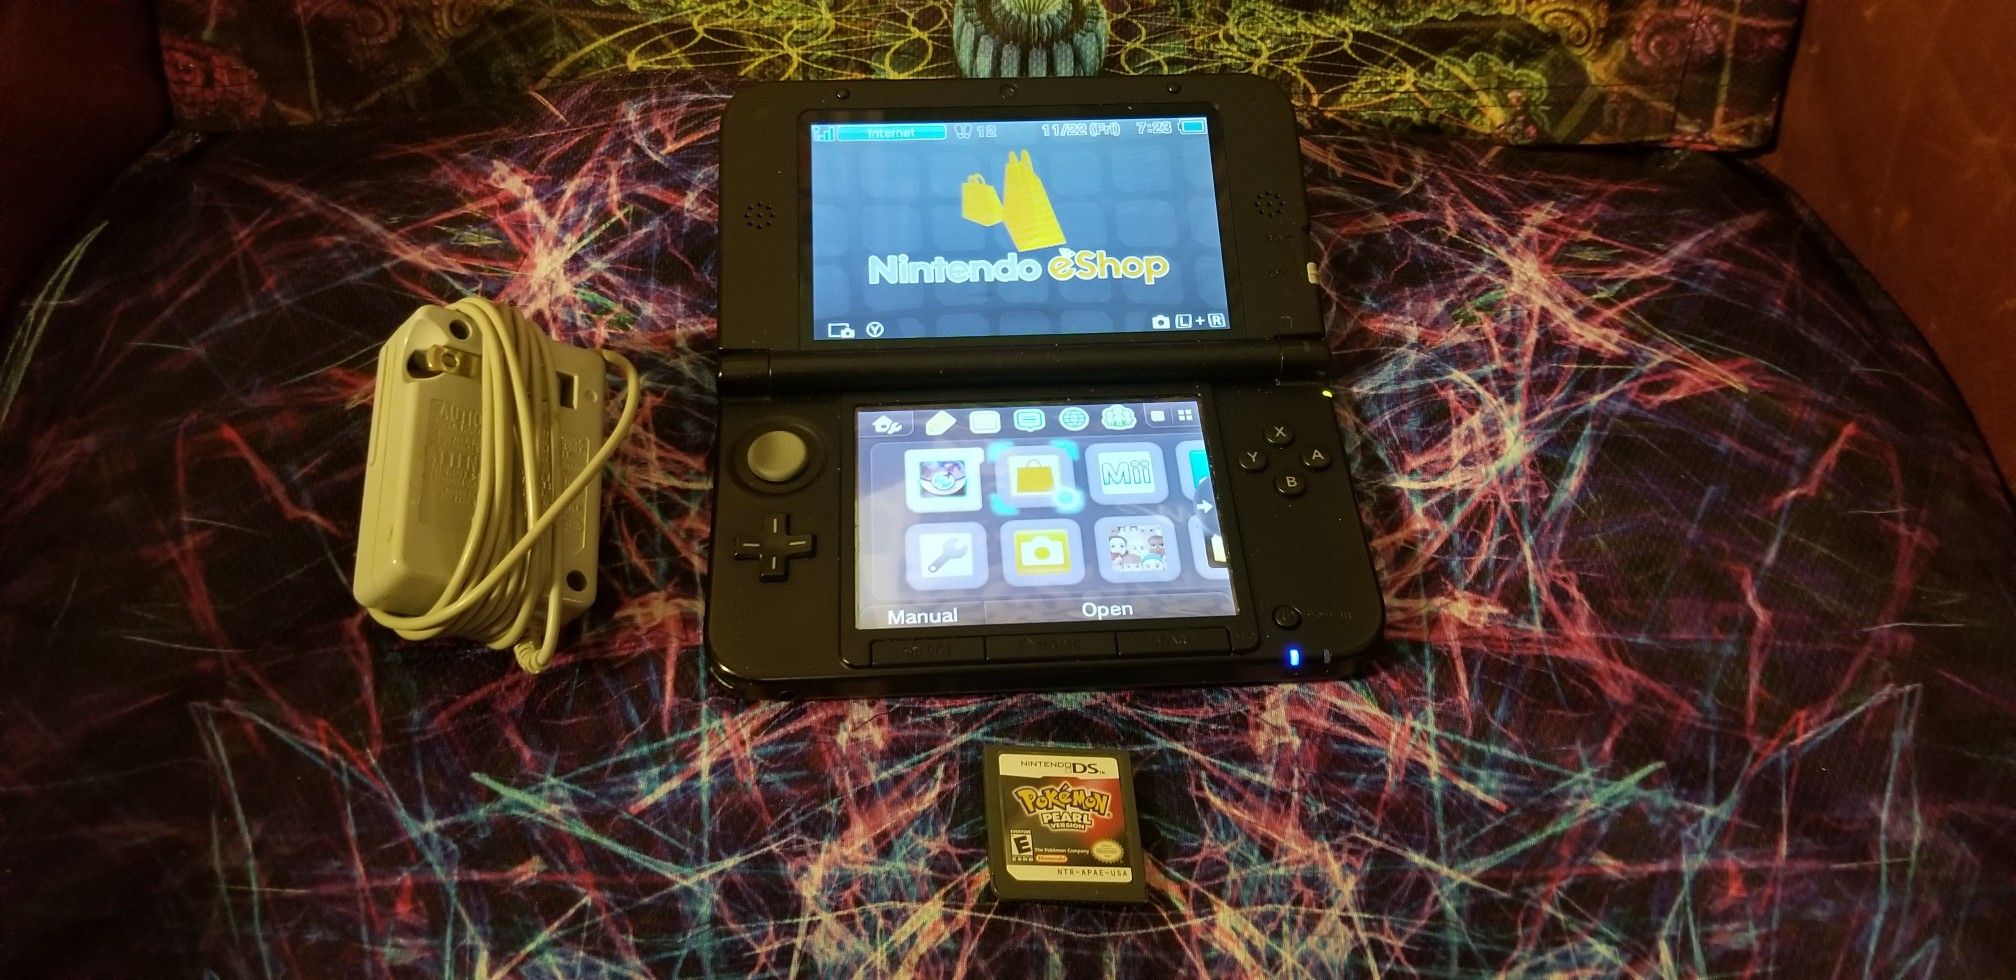 Nintendo DS XL (Charger, 32gb SD Card, and Pokemon Pearl Included)